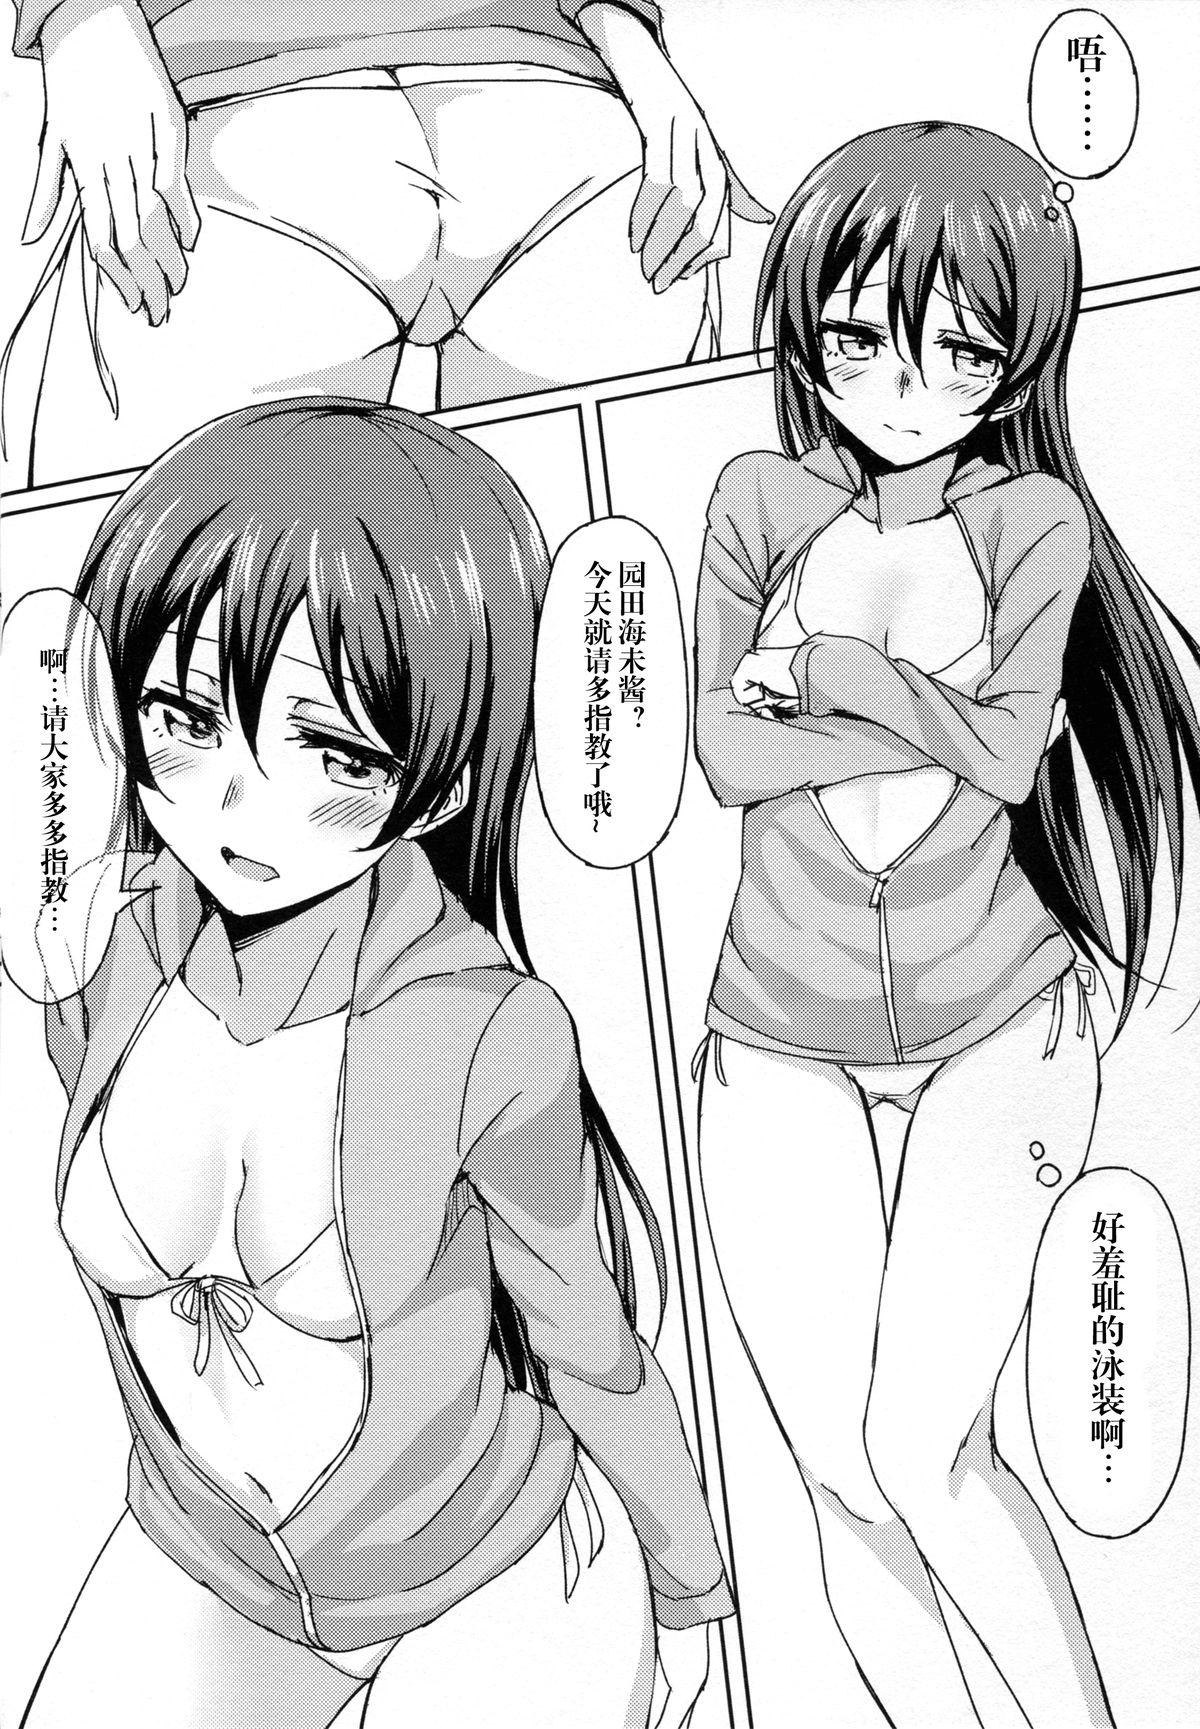 Anale Hah,Wrench This! - Love live Stripping - Page 7